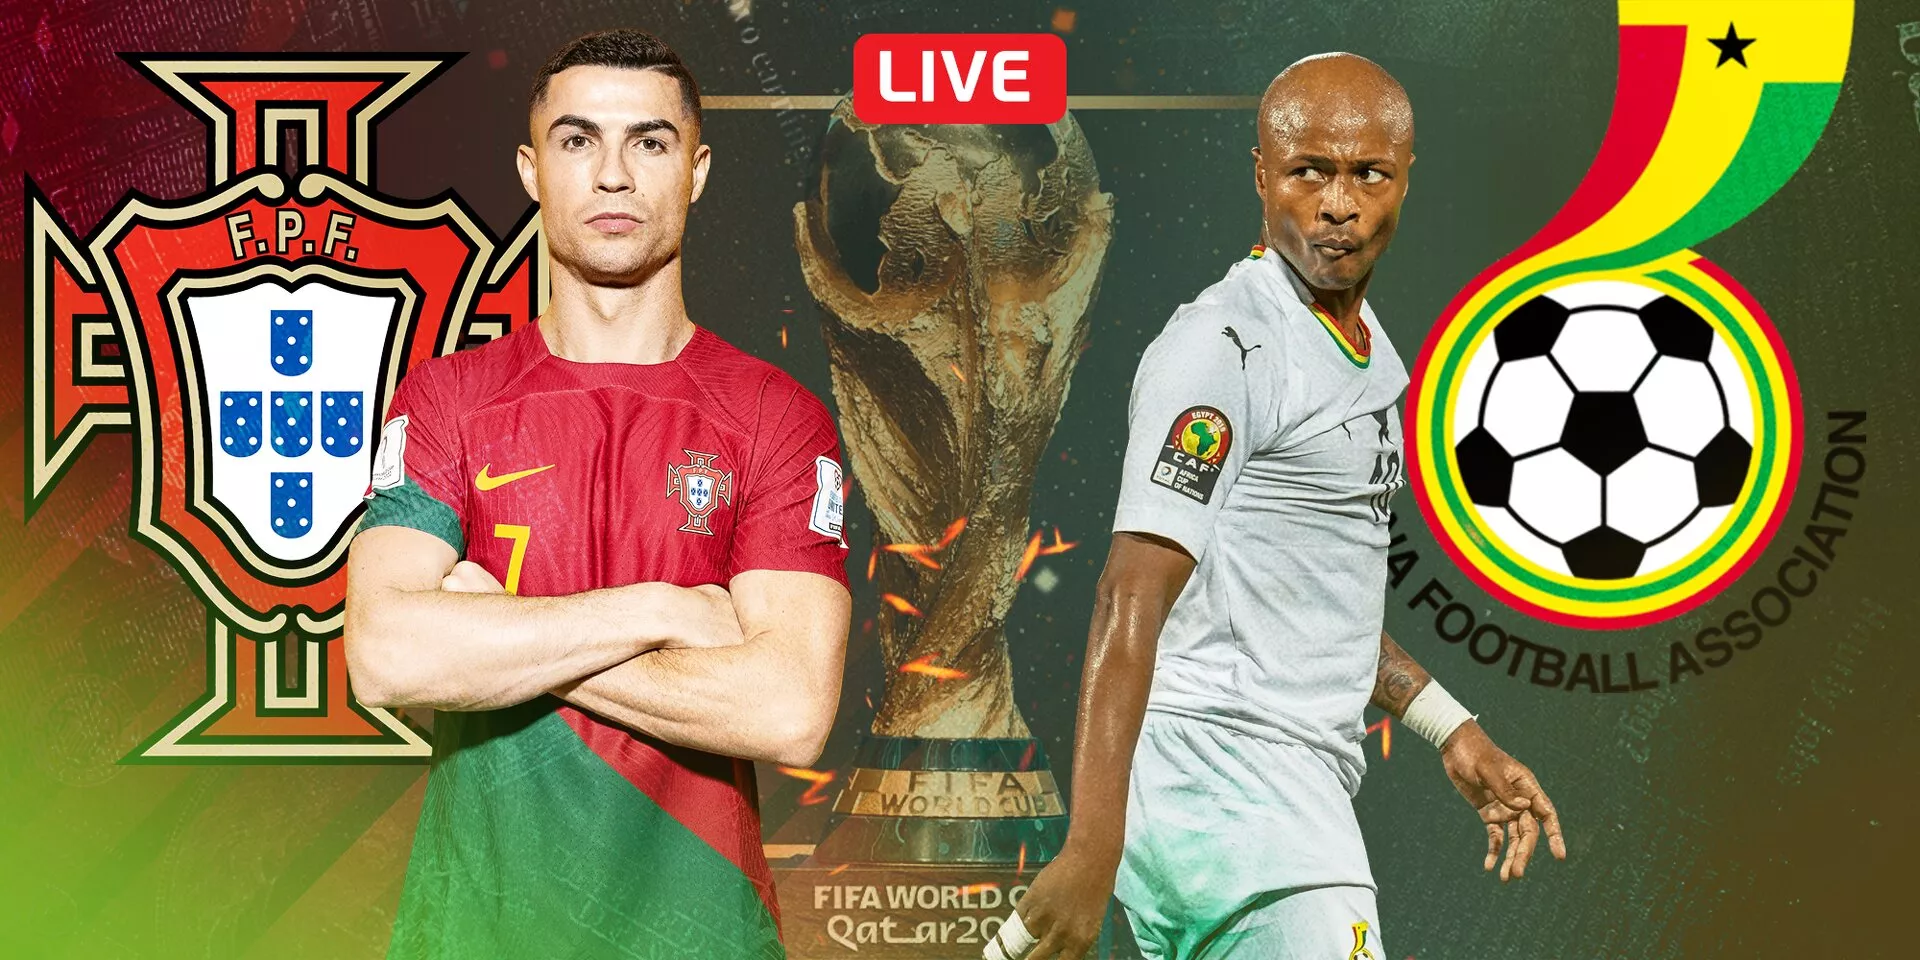 portugal world cup live